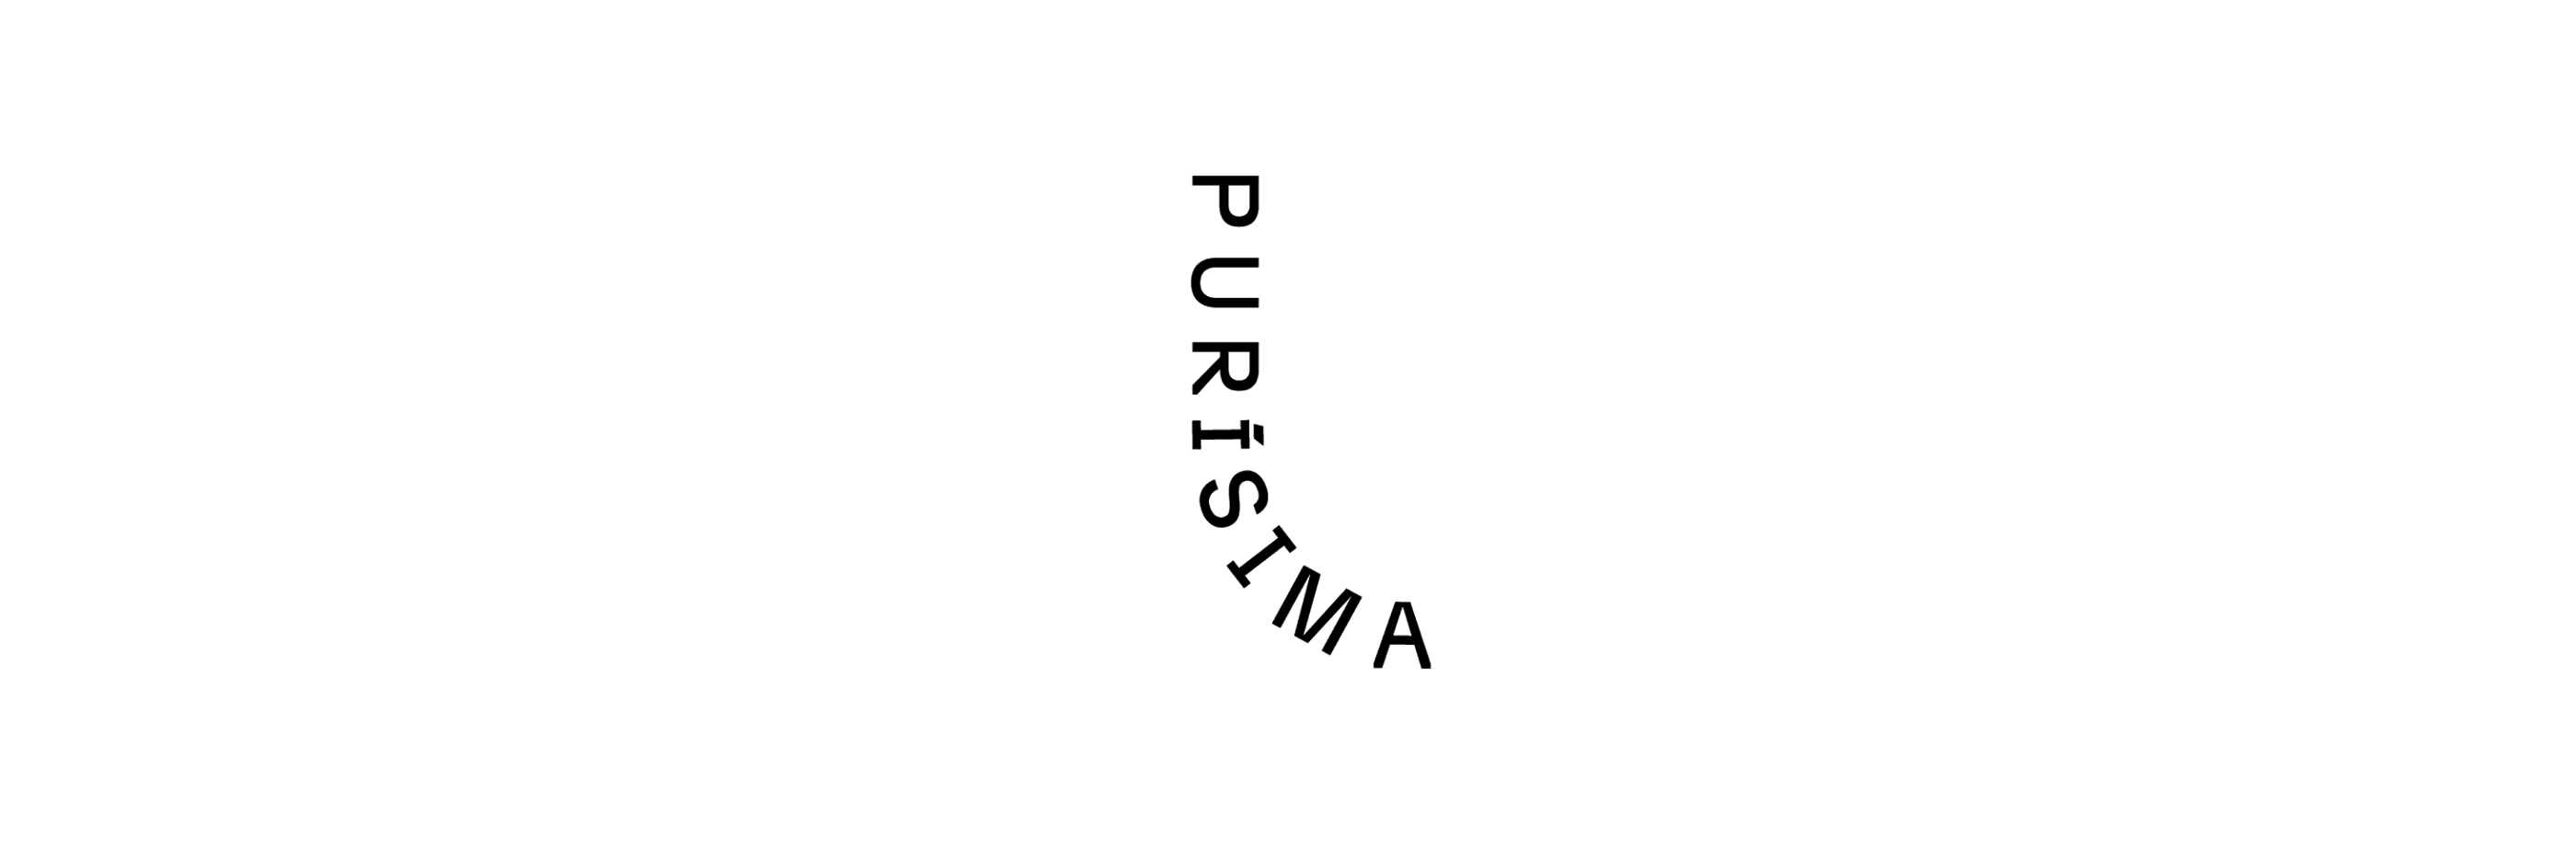 The Purísima logo - the name curves slightly to the right.